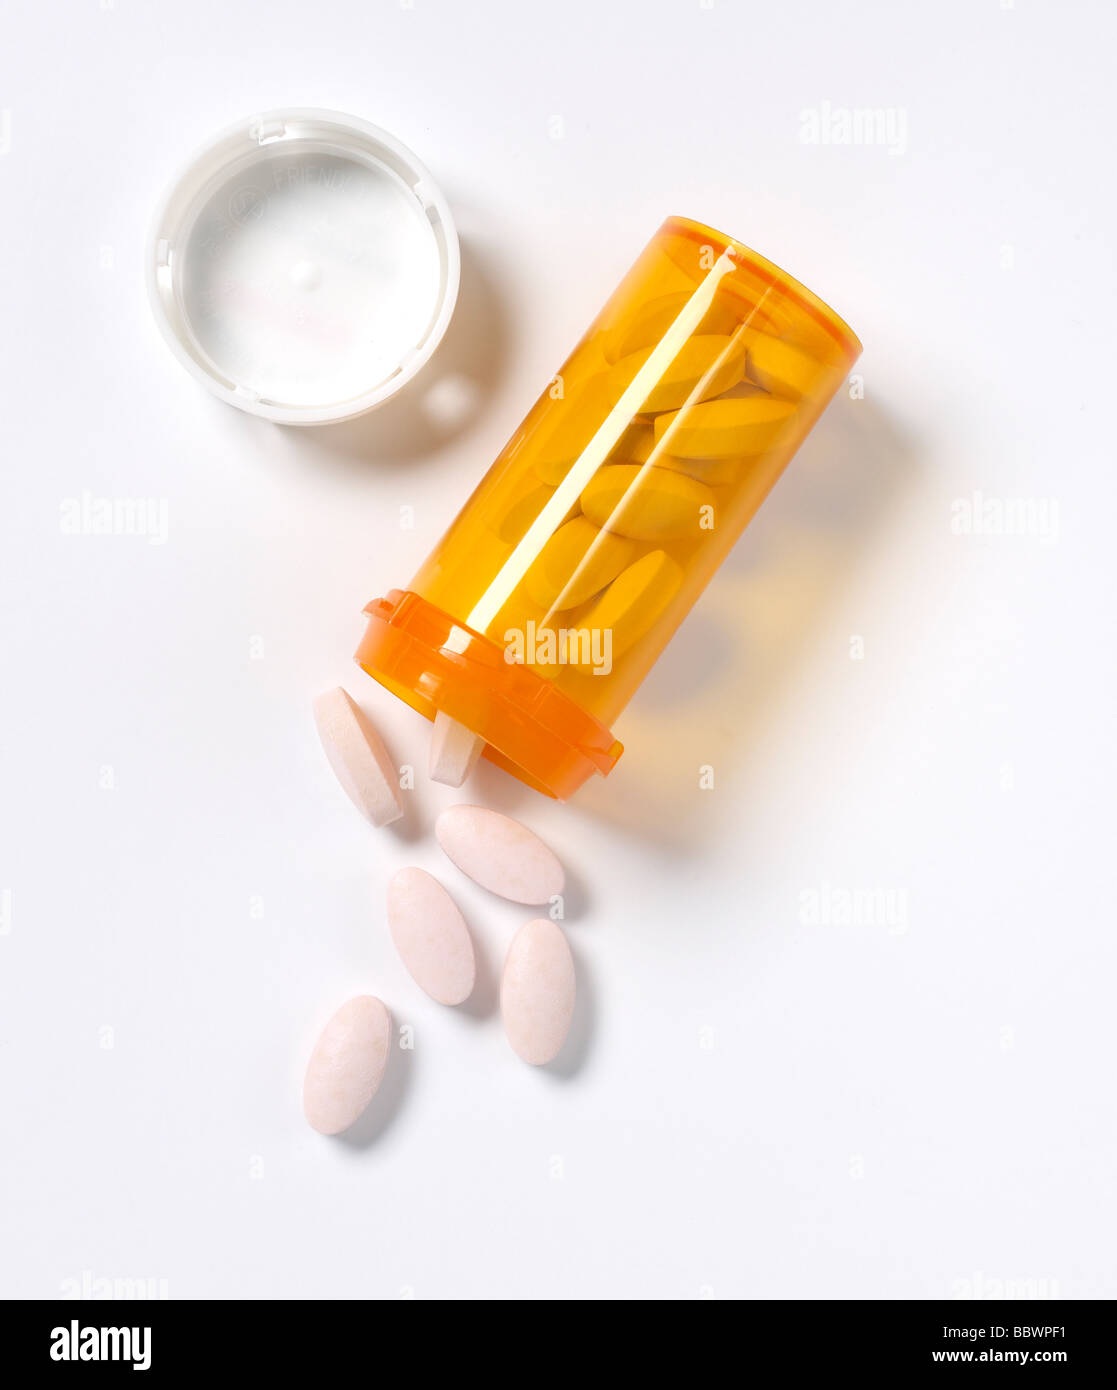 Pill bottle container elevated view Stock Photo